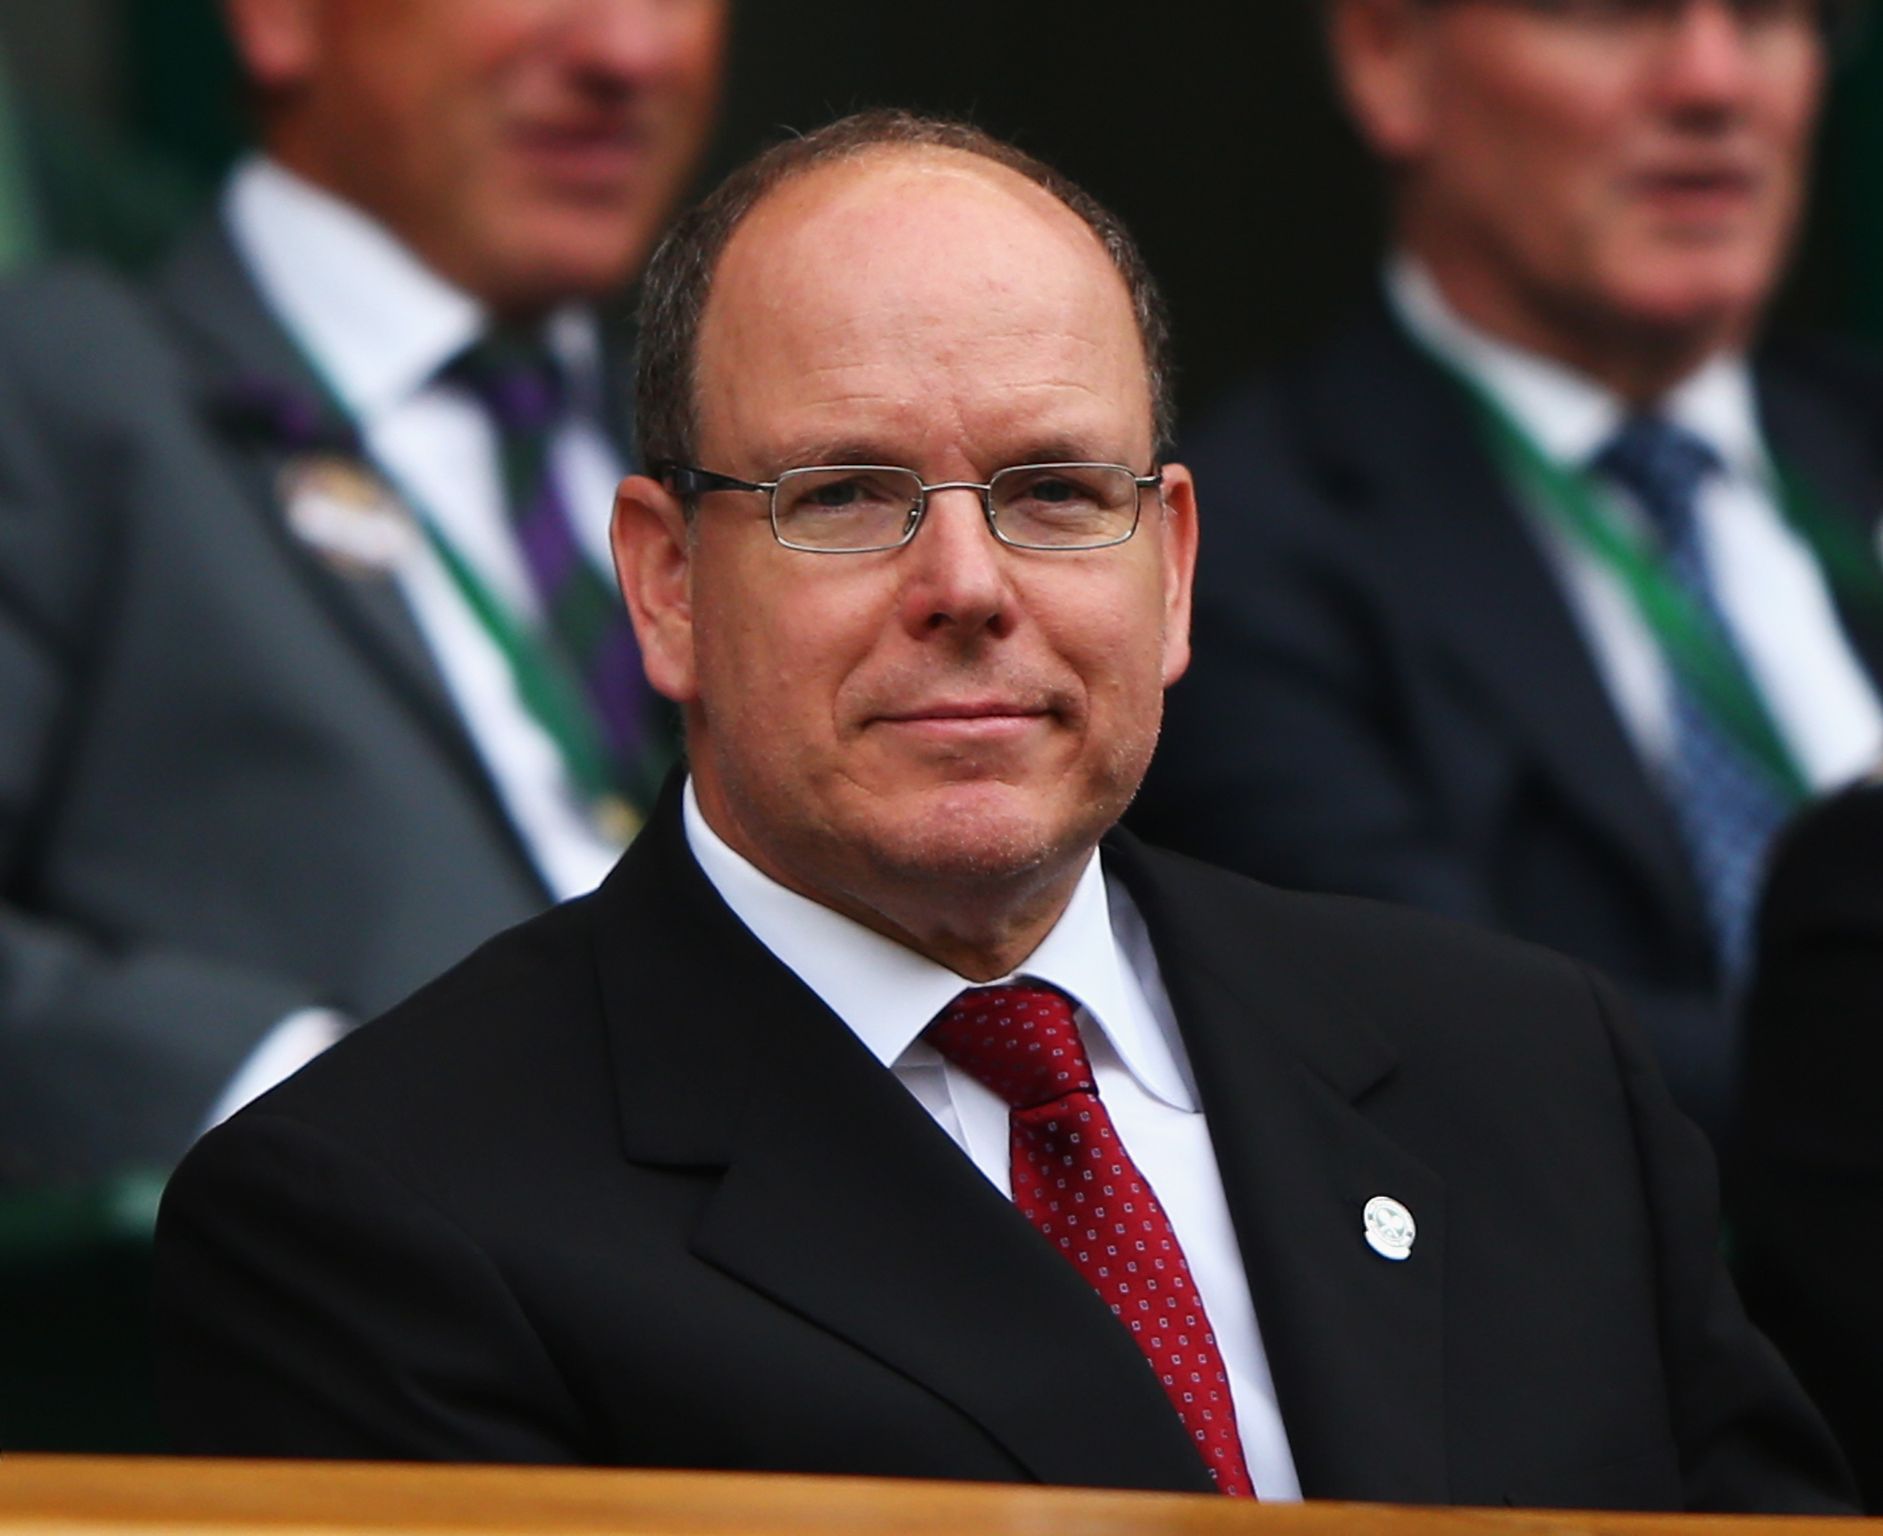 Prince Albert II of Monaco at the Wimbledon Lawn Tennis Championships in London in 2015 | Source: Getty Images